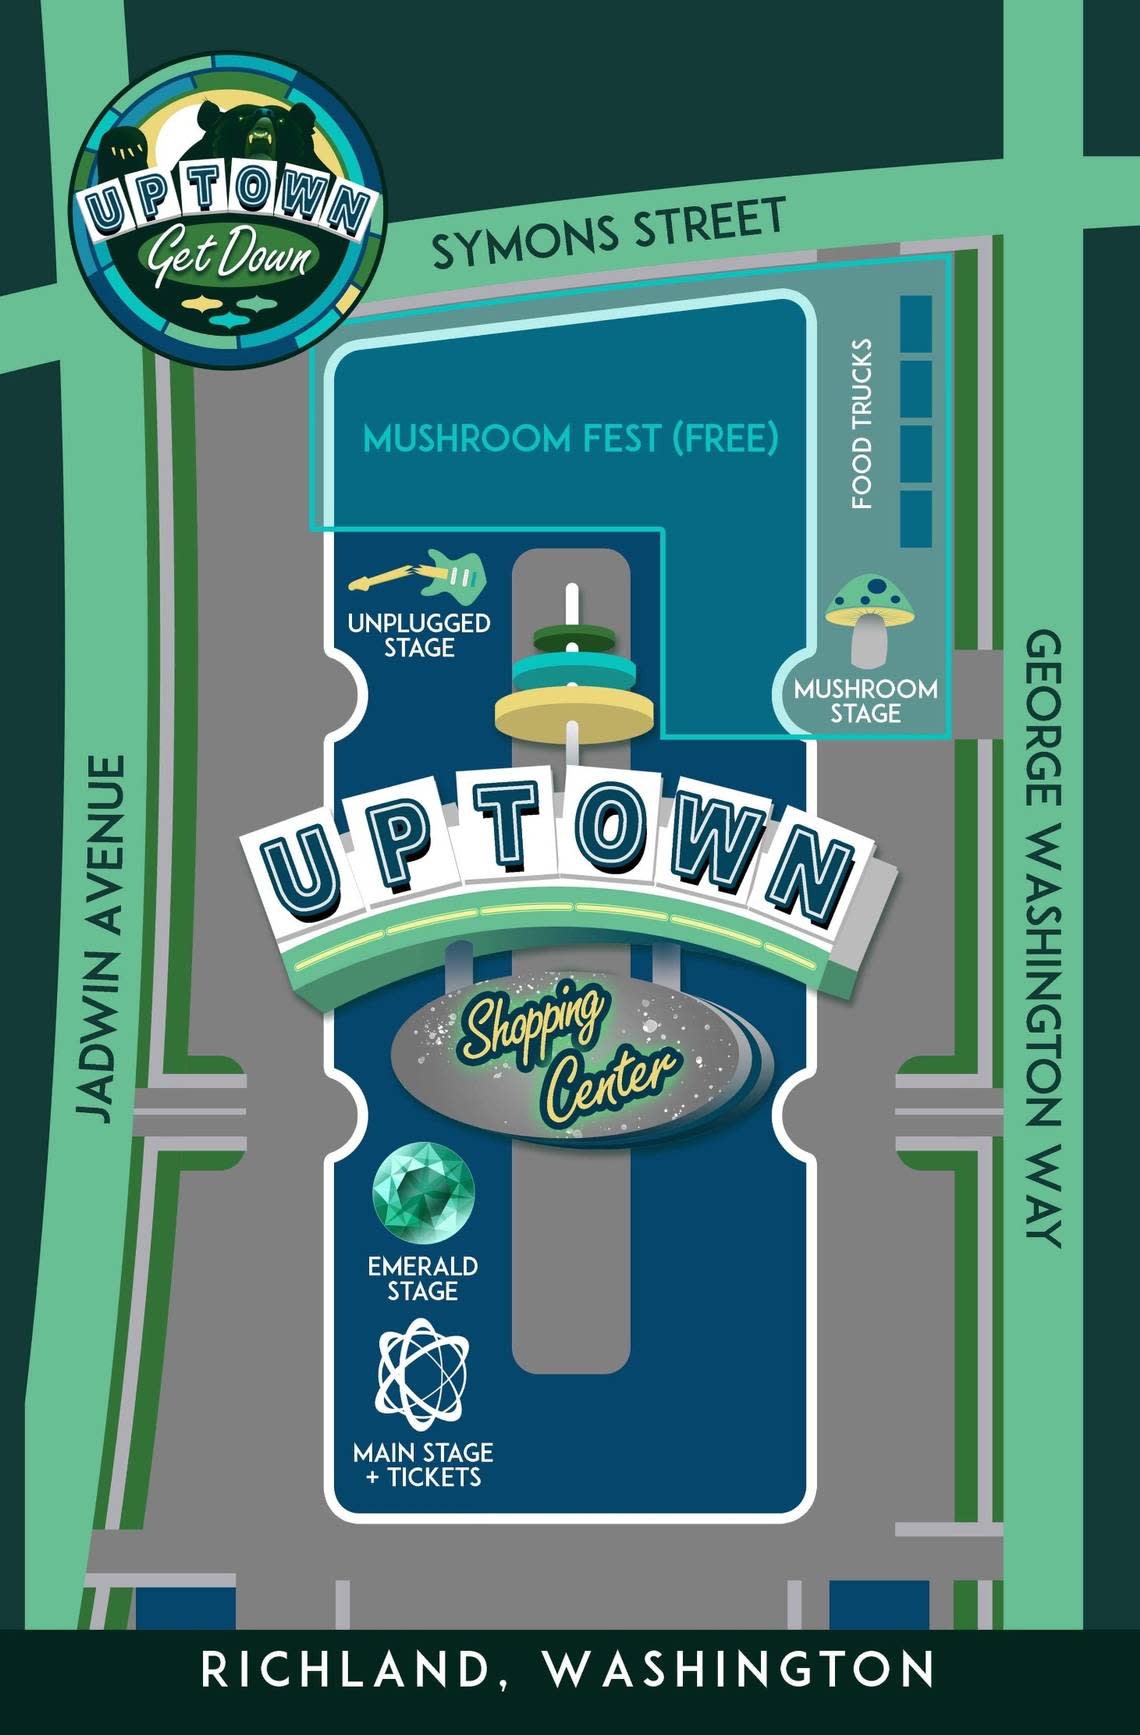 The Uptown Get Down music festival will take place in the Uptown Shopping Center, with performances in four different venues.